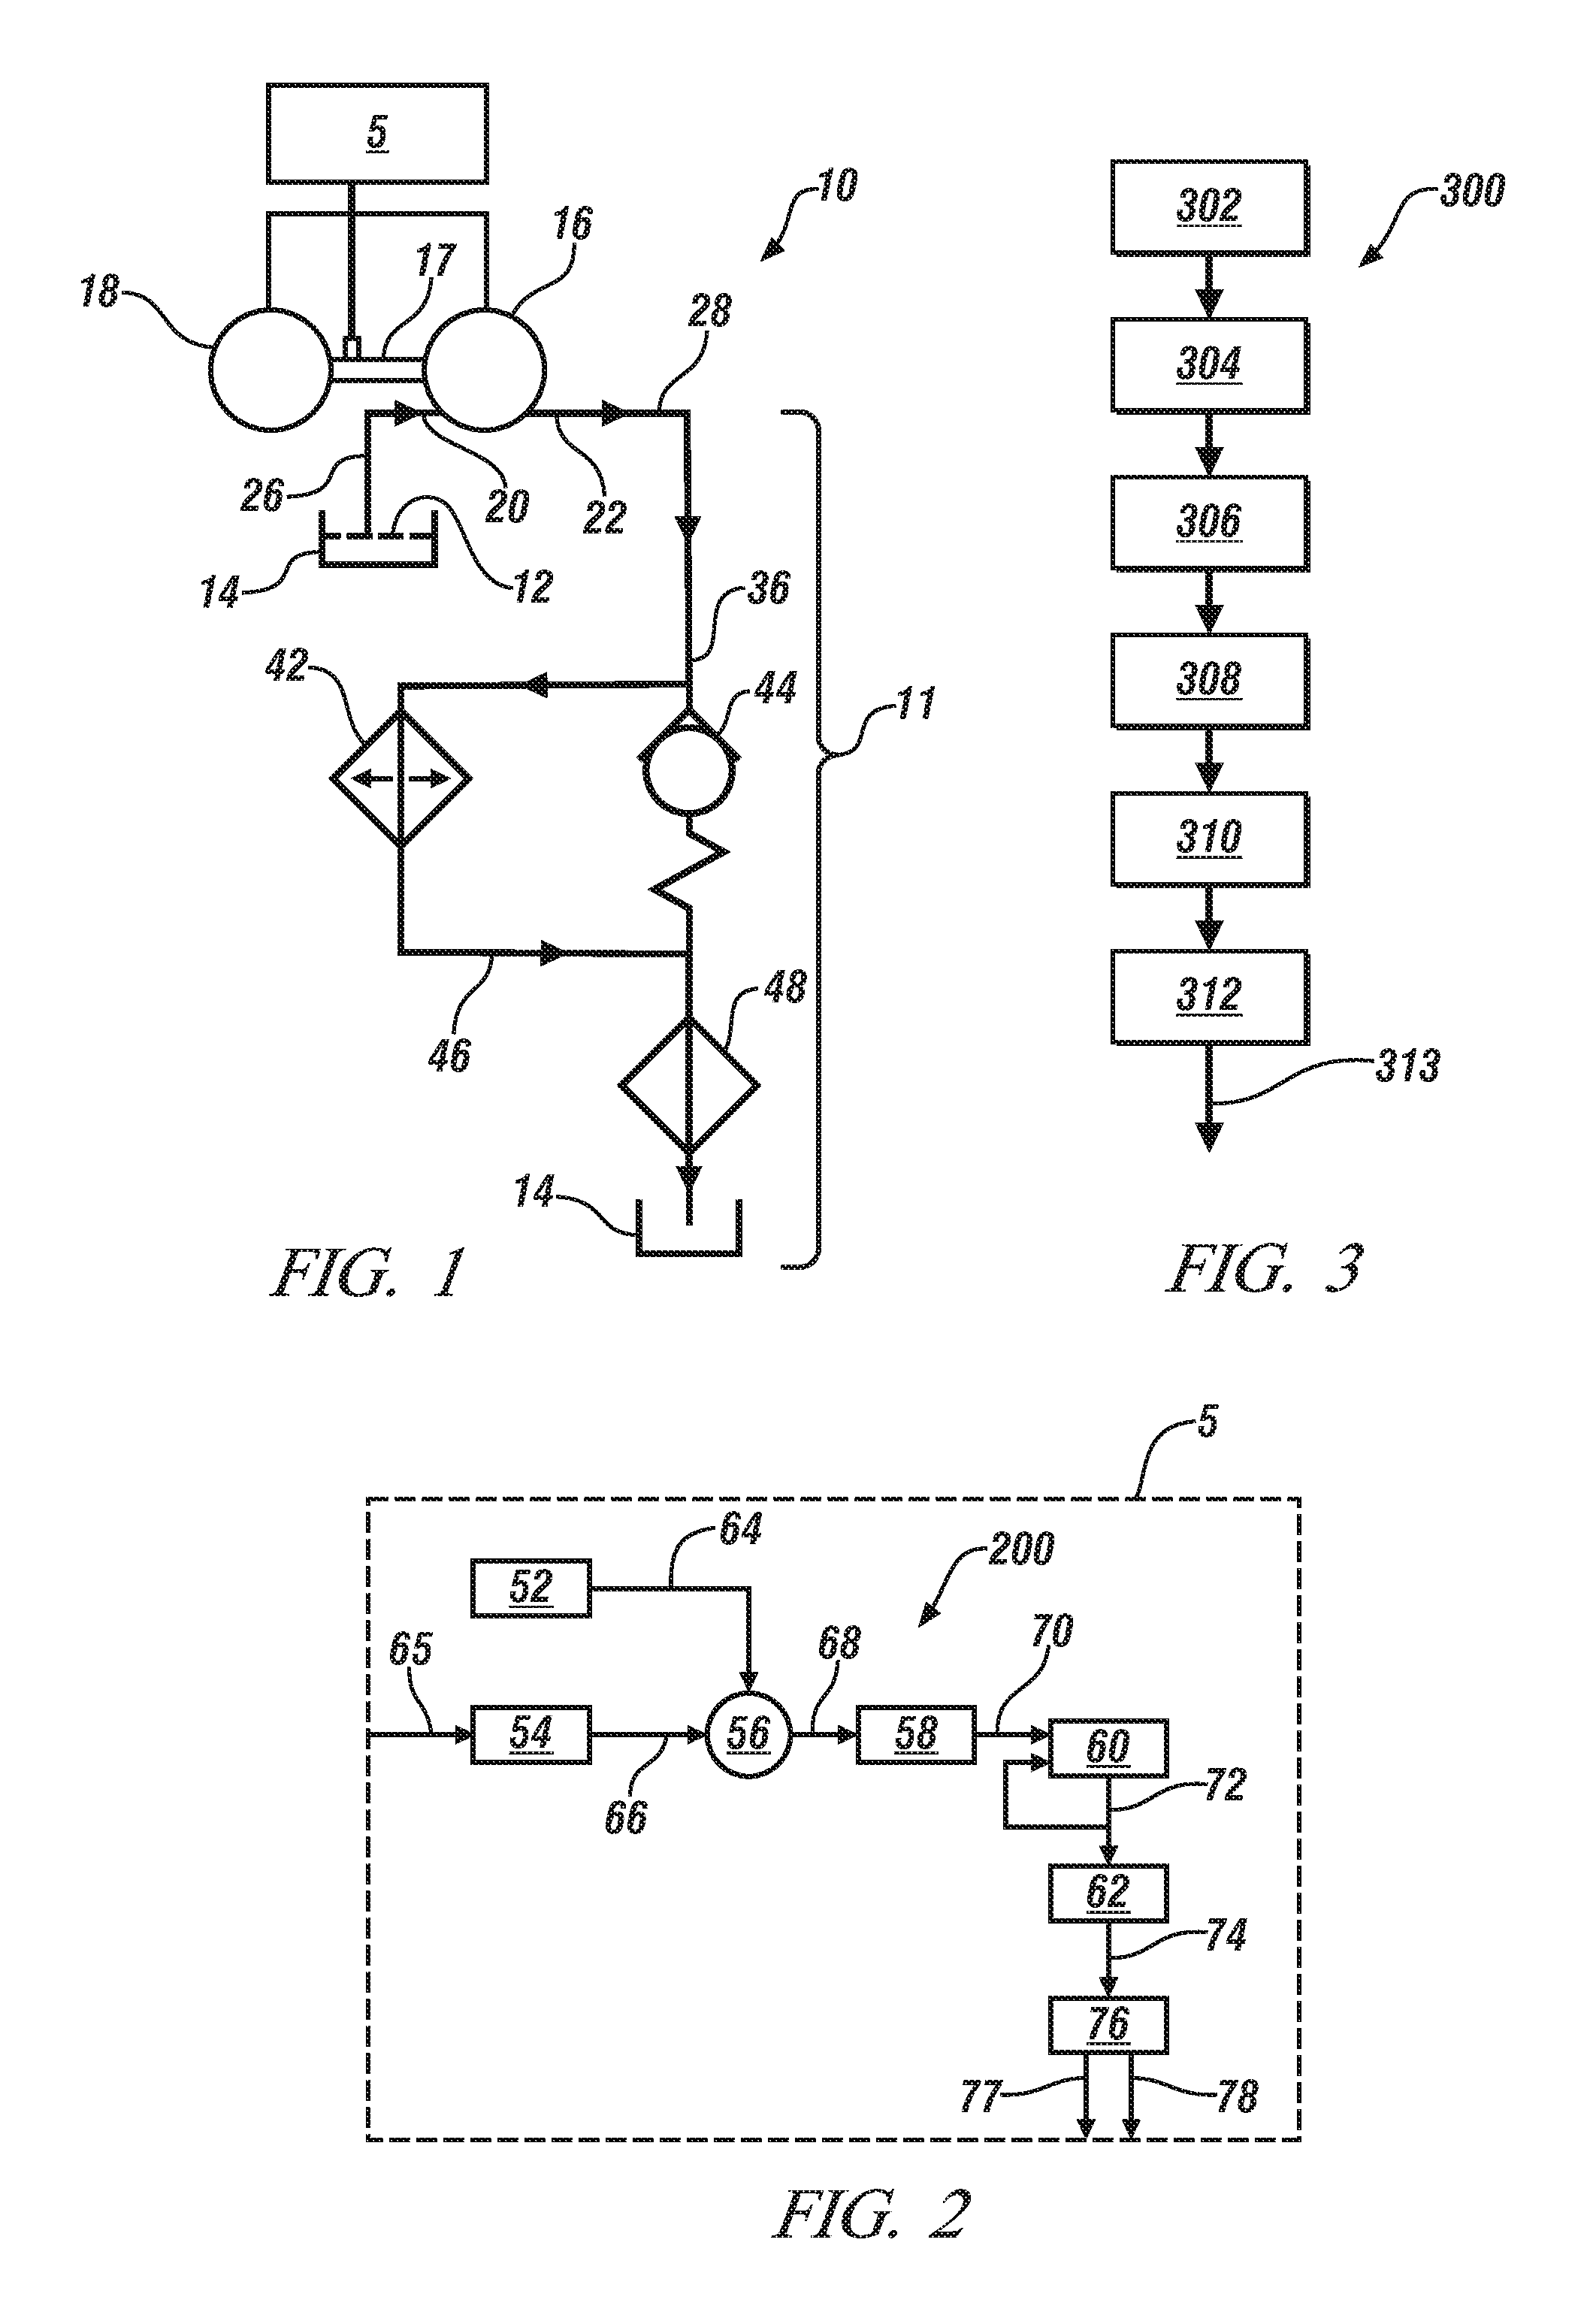 Method to detect loss of fluid or blockage in a hydraulic circuit using exponentially weighted moving average filter